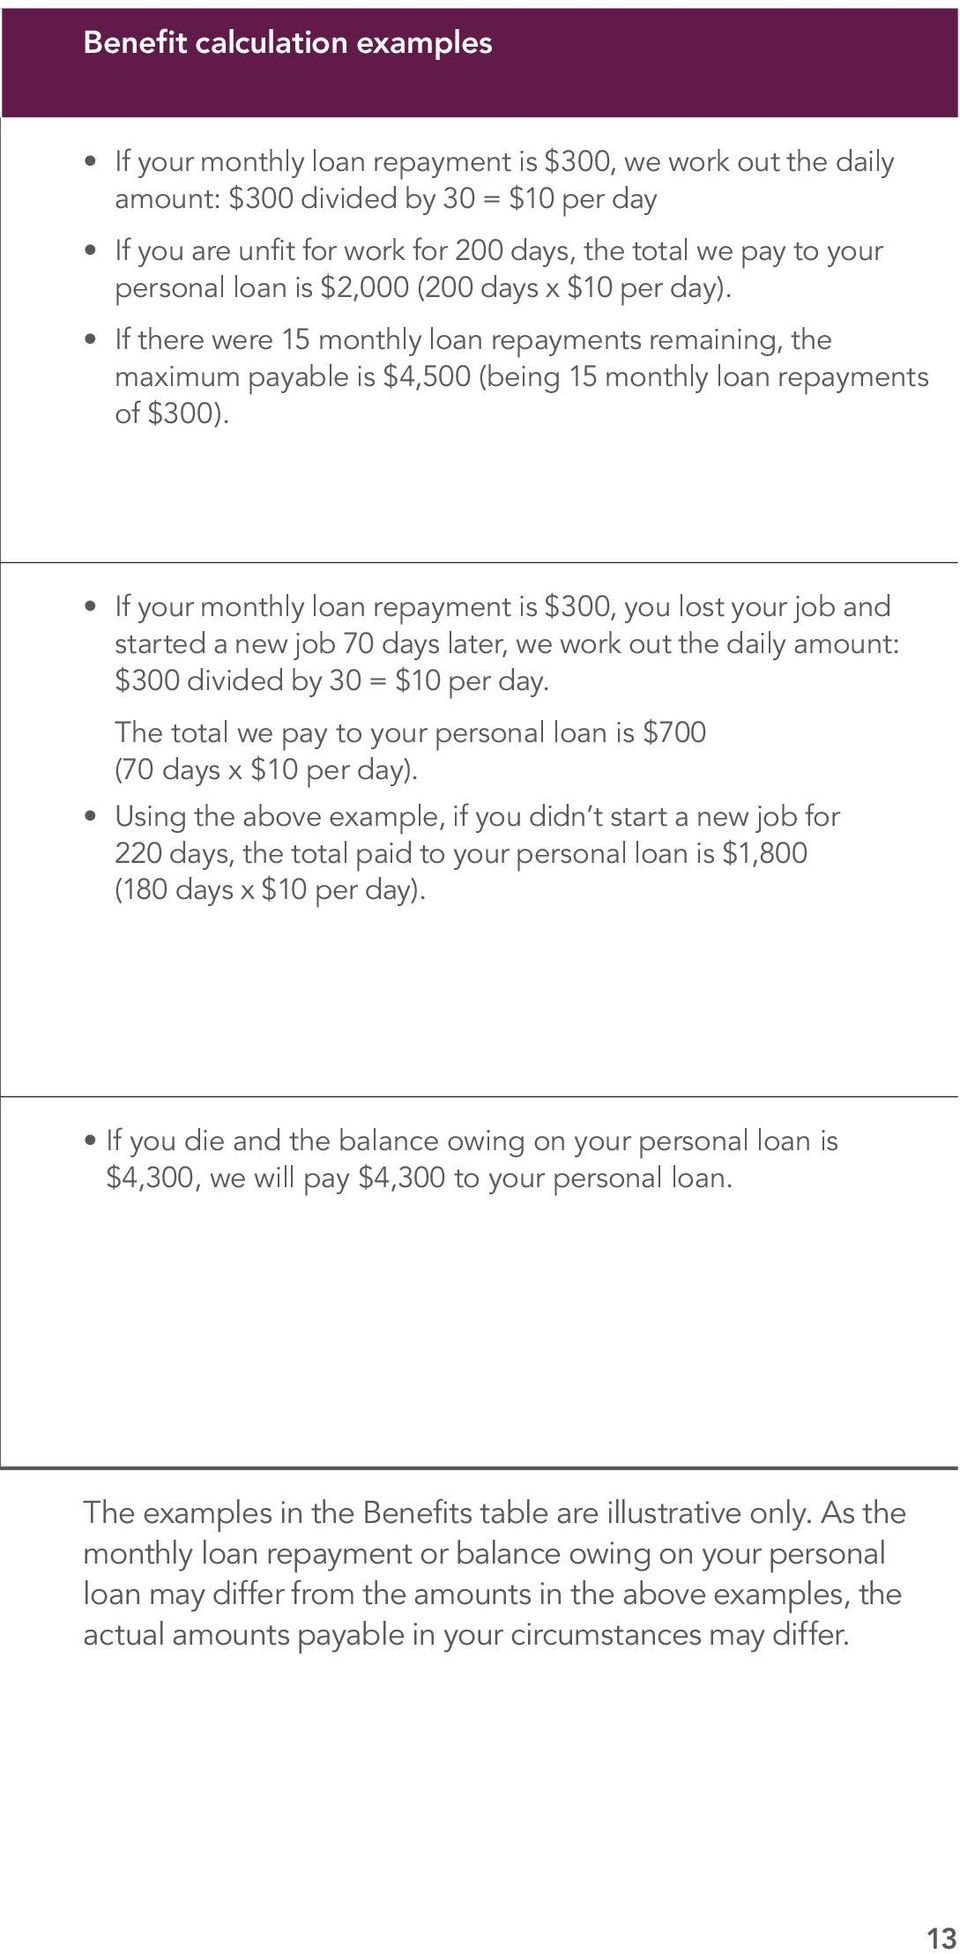 If your monthly loan repayment is $300, you lost your job and started a new job 70 days later, we work out the daily amount: $300 divided by 30 = $10 per day.